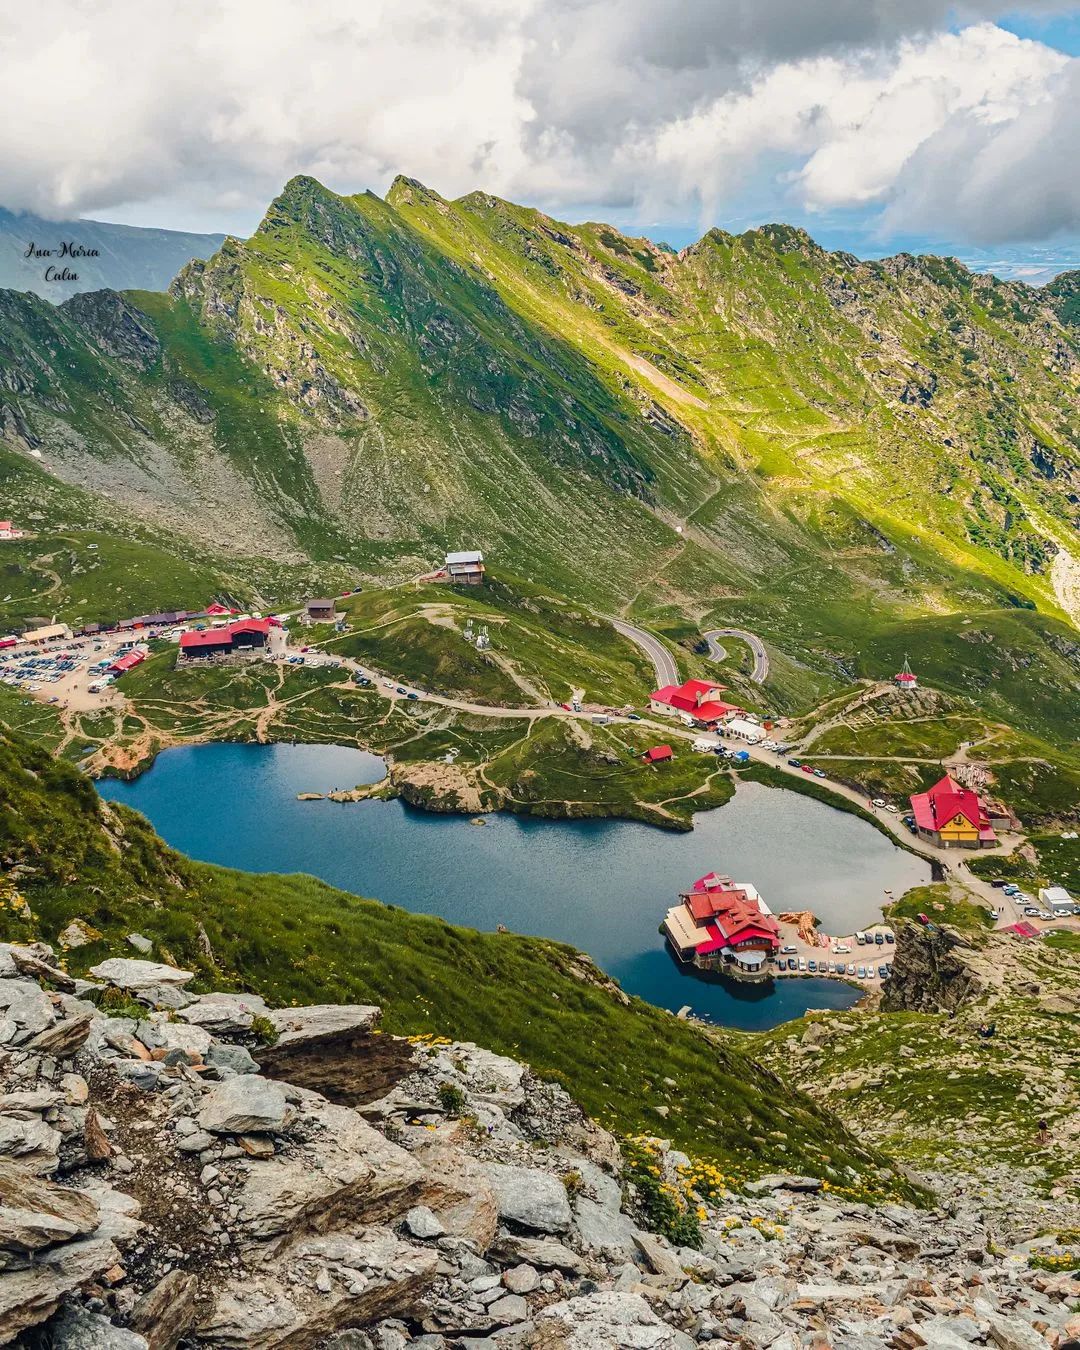 Incredible view over Balea Lake, the highest point of the epic Transfagarasan Road in Transylvania - 25 Famous Landmarks in Romania